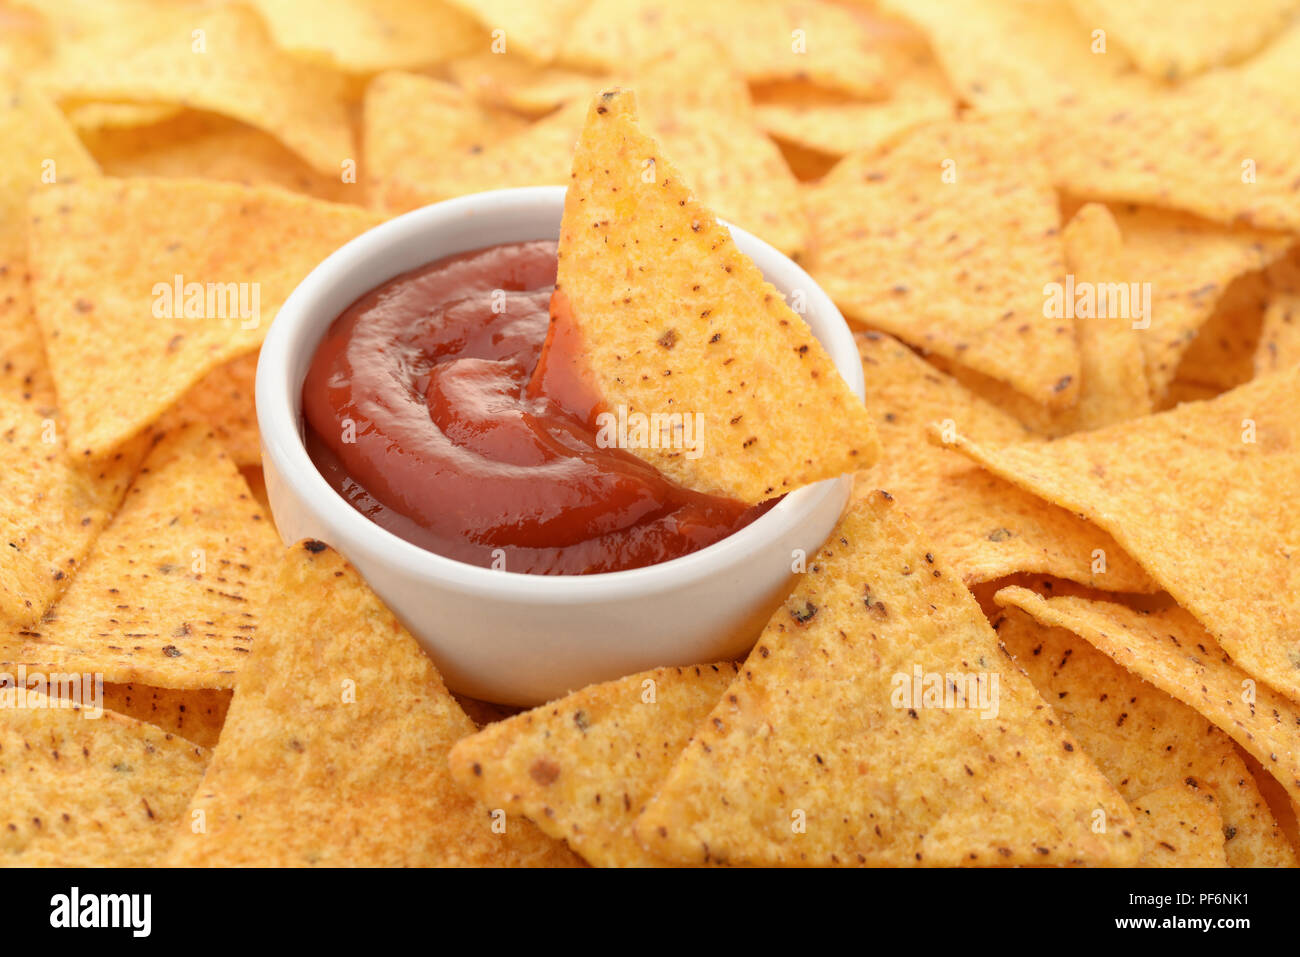 Close up of nacho chips and tomato dip sauce Stock Photo